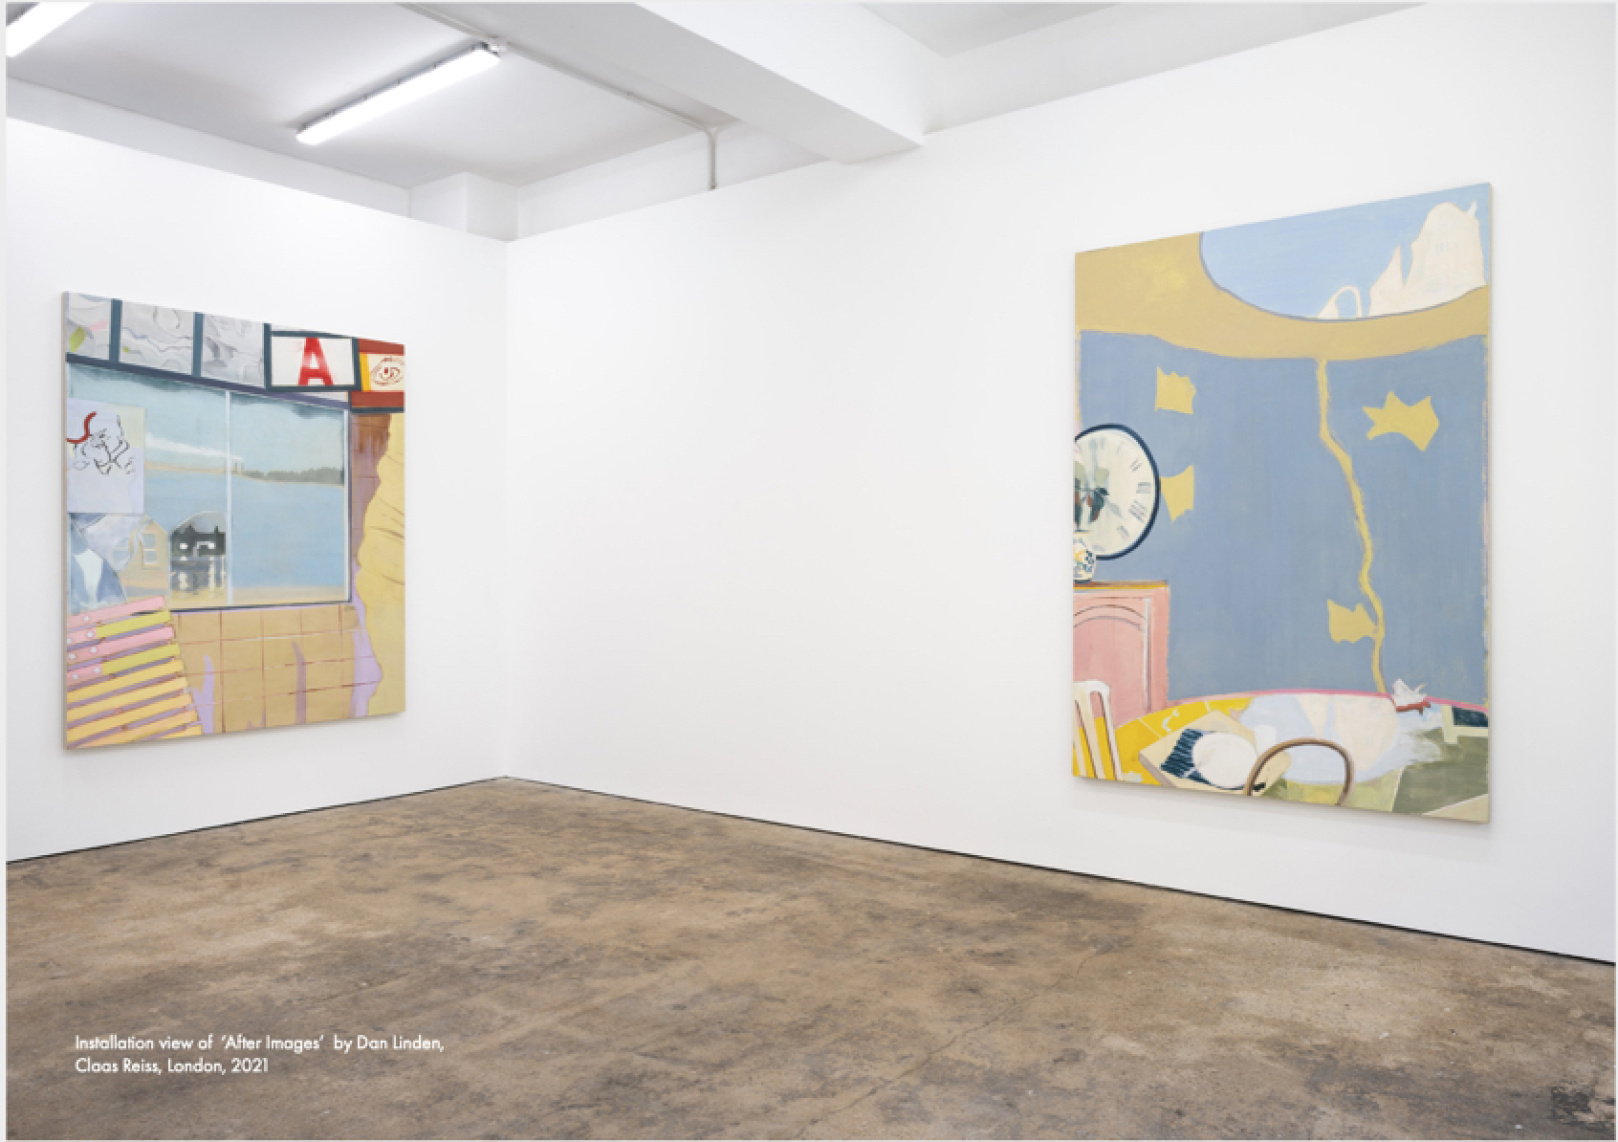 Installation view After Images by Dan Linden at Claas Reiss Gallery